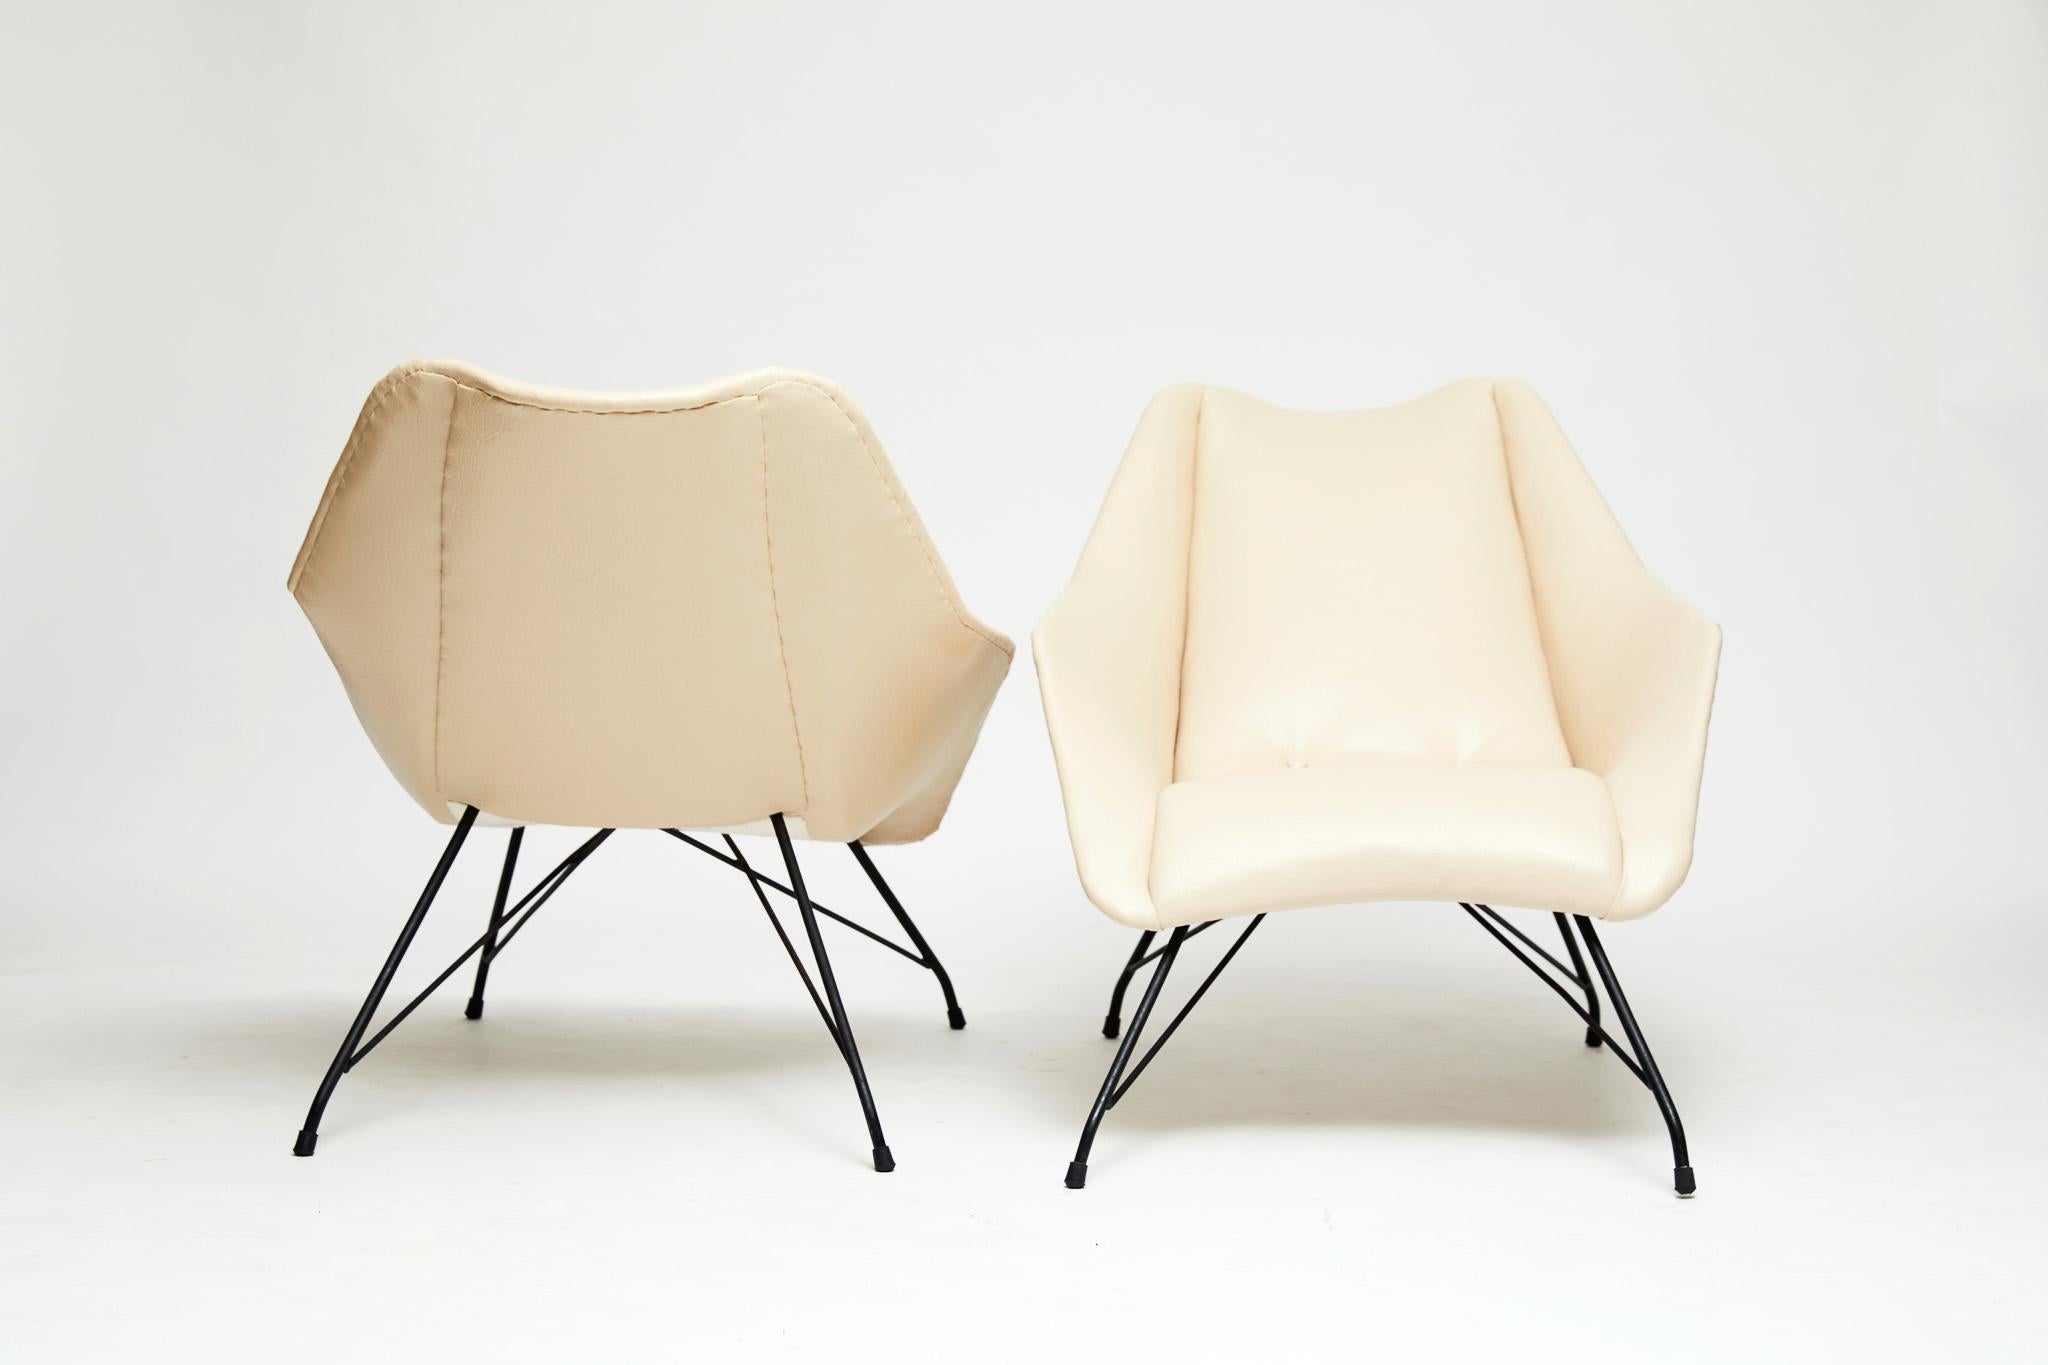 20th Century Midcentury Armchairs in White Leather & Iron Base by Carlo Hauner, 1955, Brazil For Sale